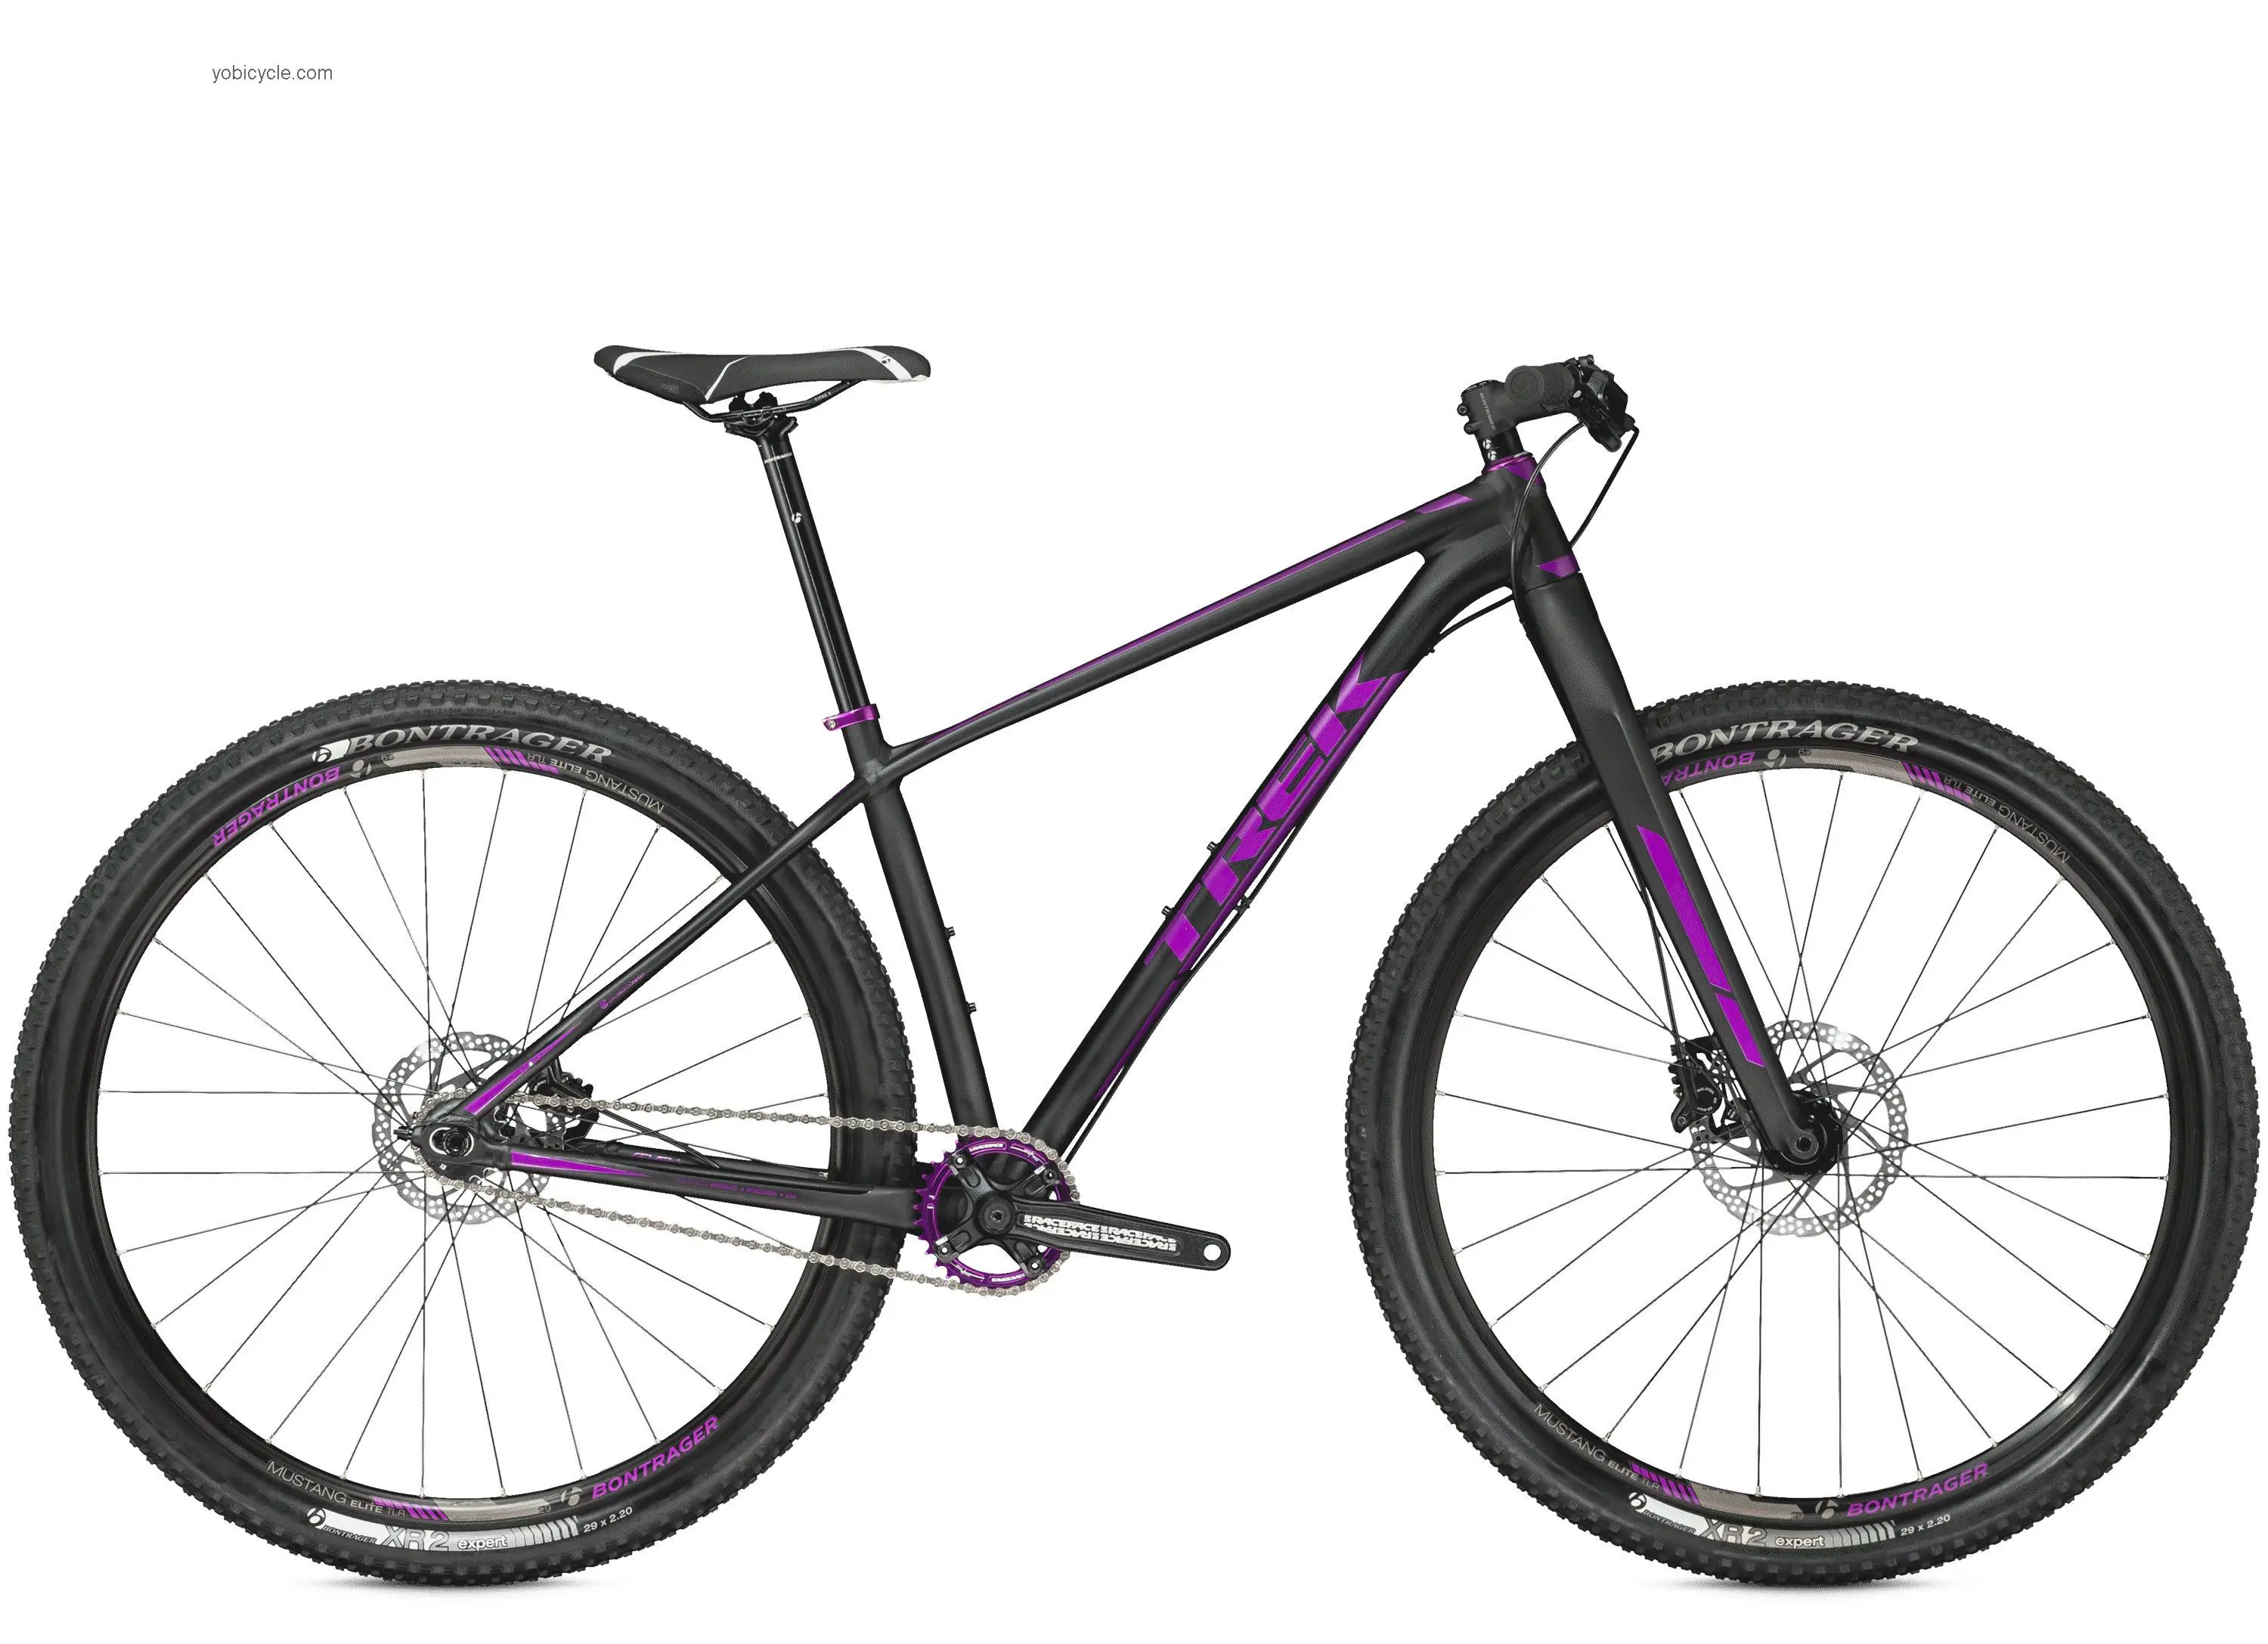 Trek Superfly SS 2015 comparison online with competitors